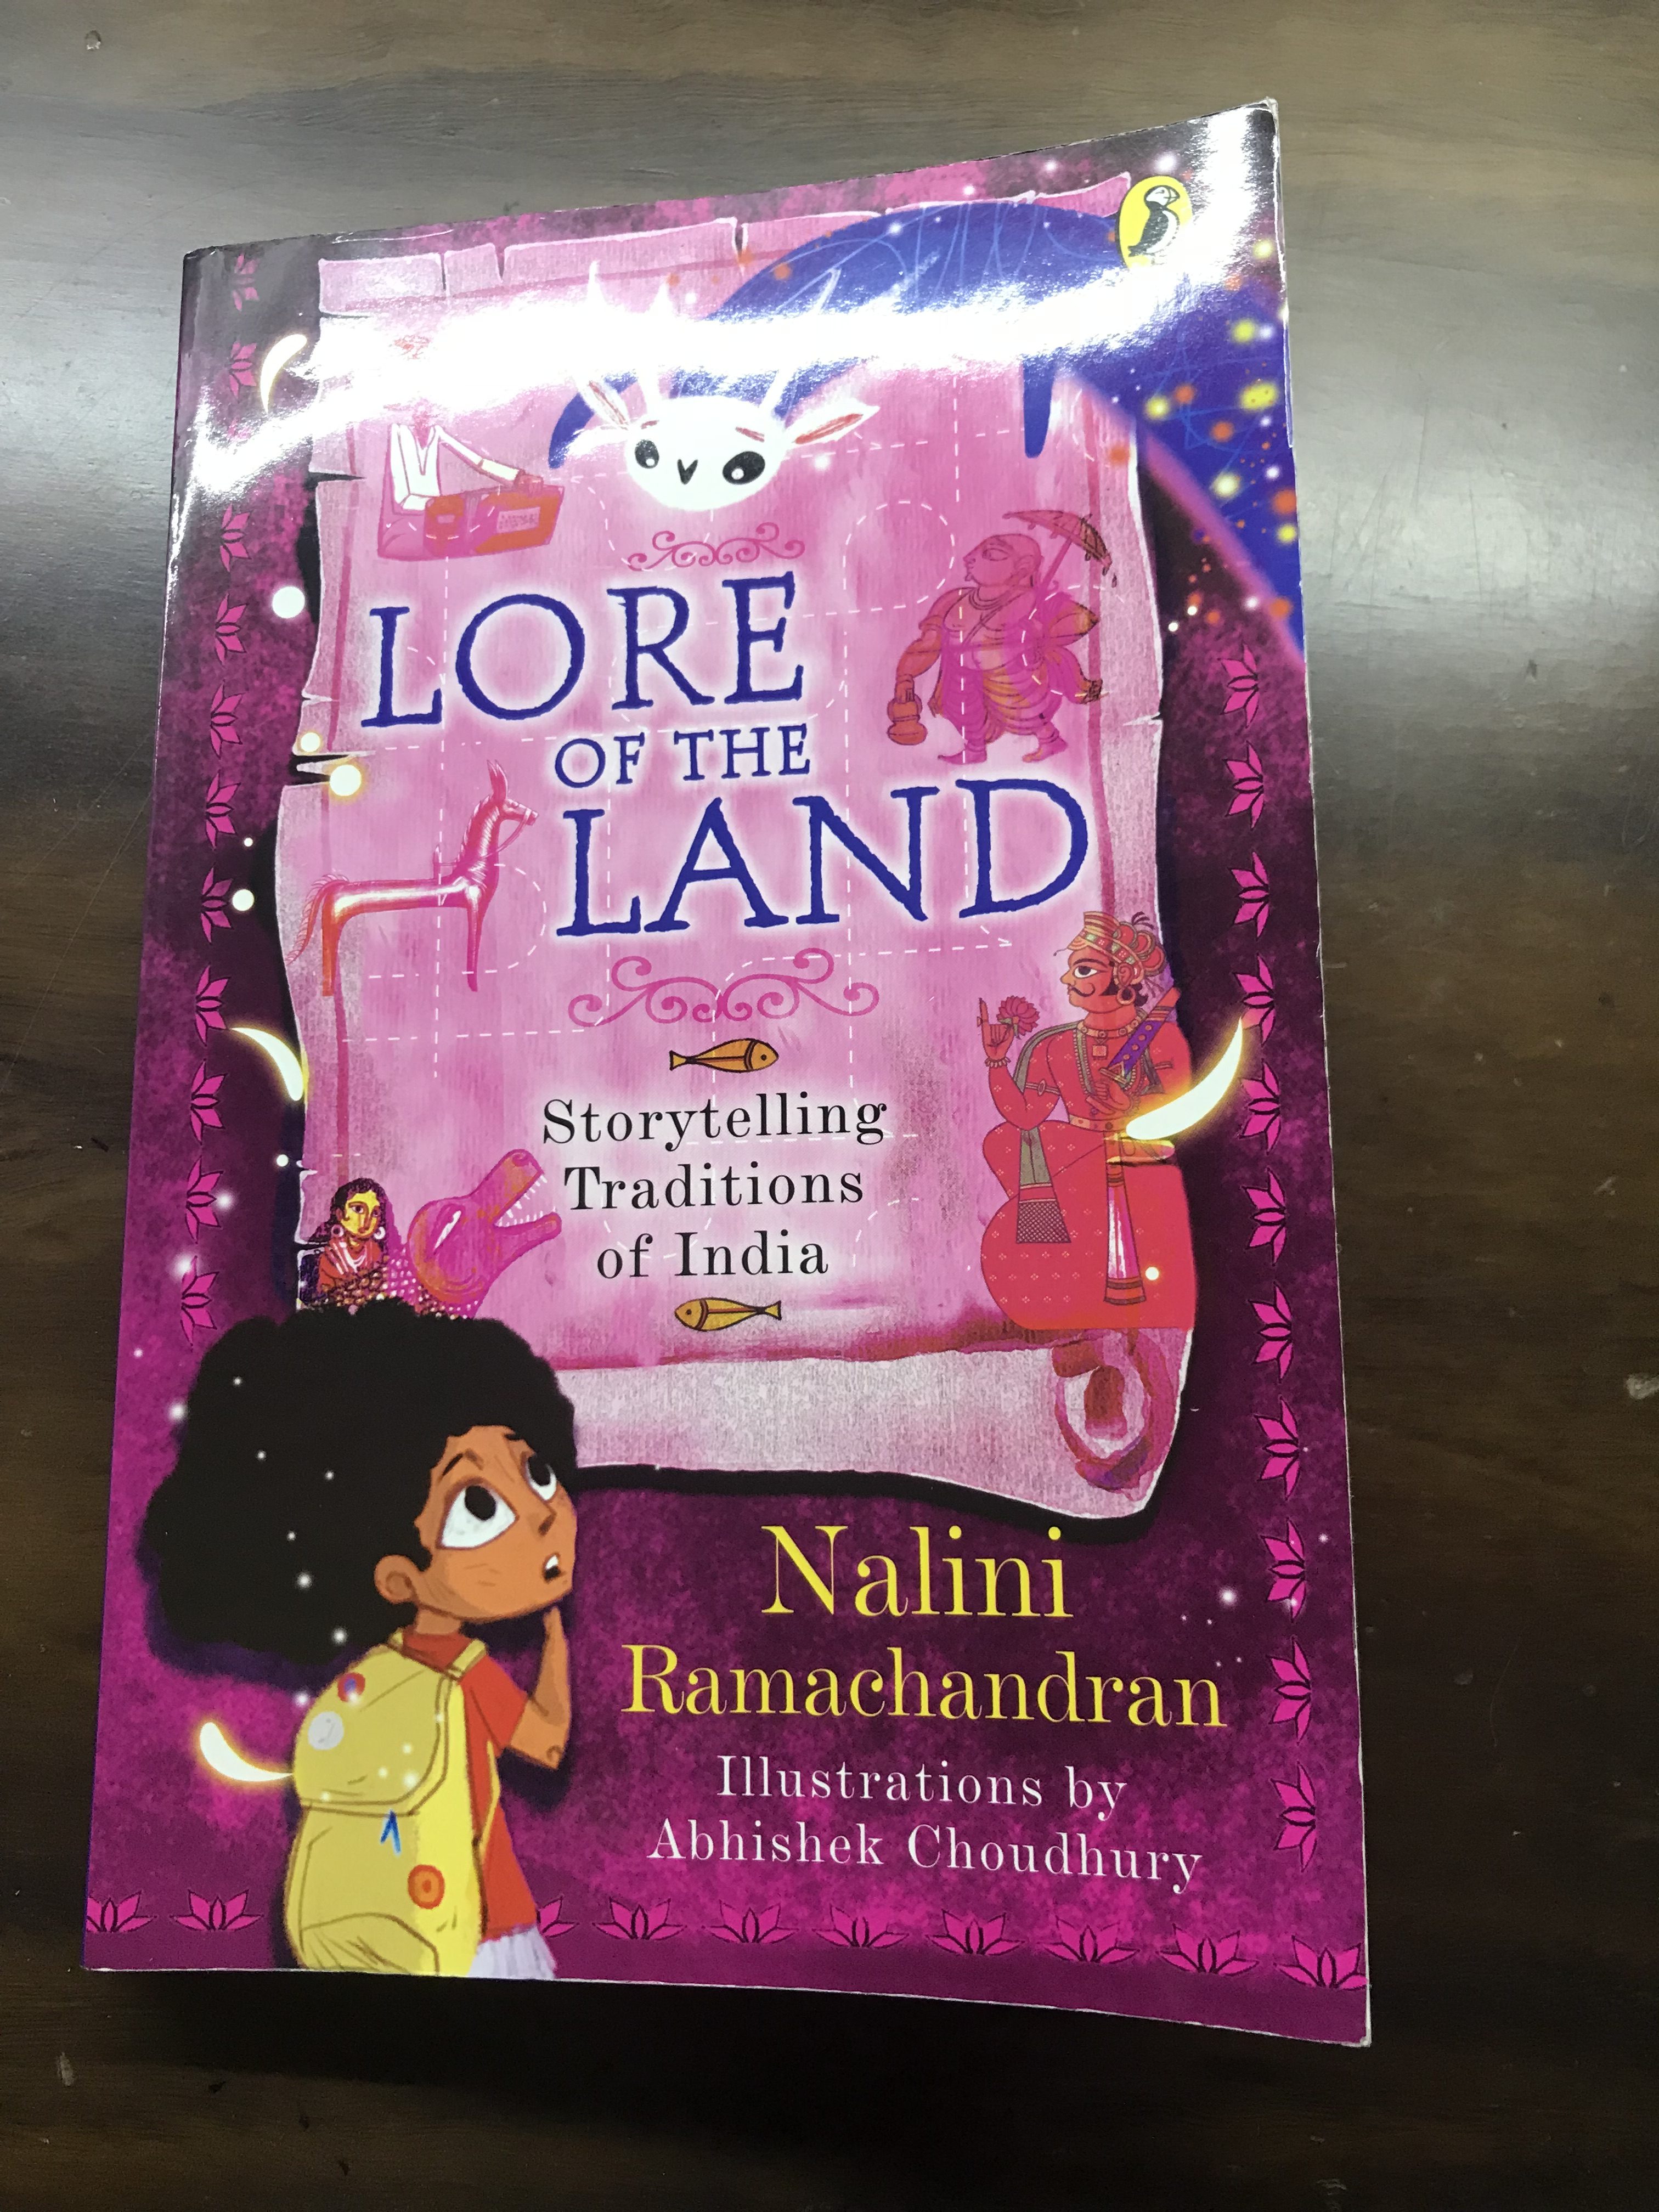 You are currently viewing Lore of the Land….….A fascinating book reveals the storytelling traditions of India 